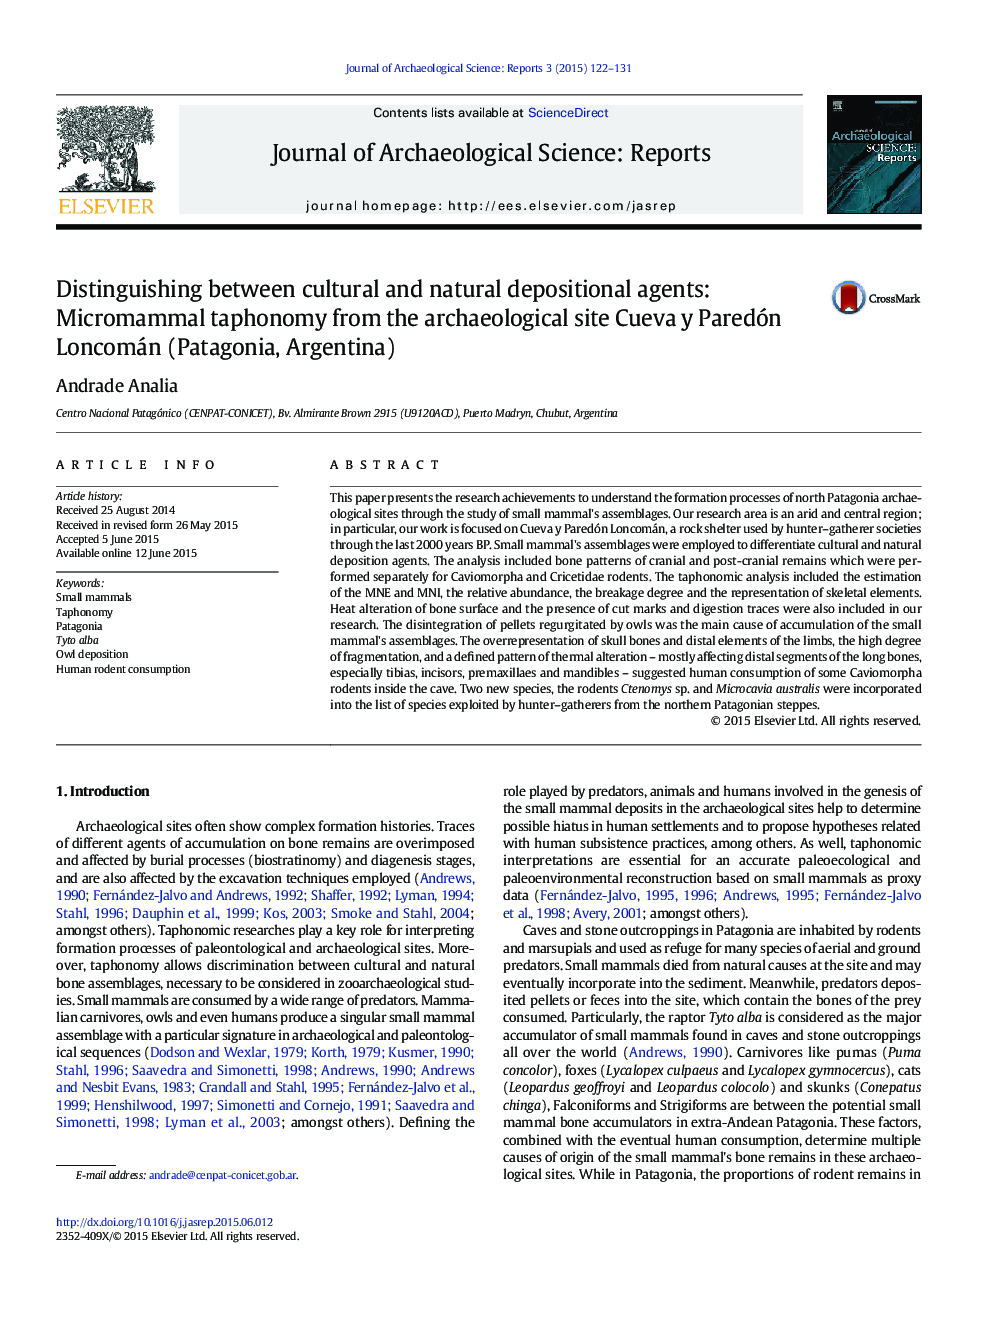 Distinguishing between cultural and natural depositional agents: Micromammal taphonomy from the archaeological site Cueva y Paredón Loncomán (Patagonia, Argentina)